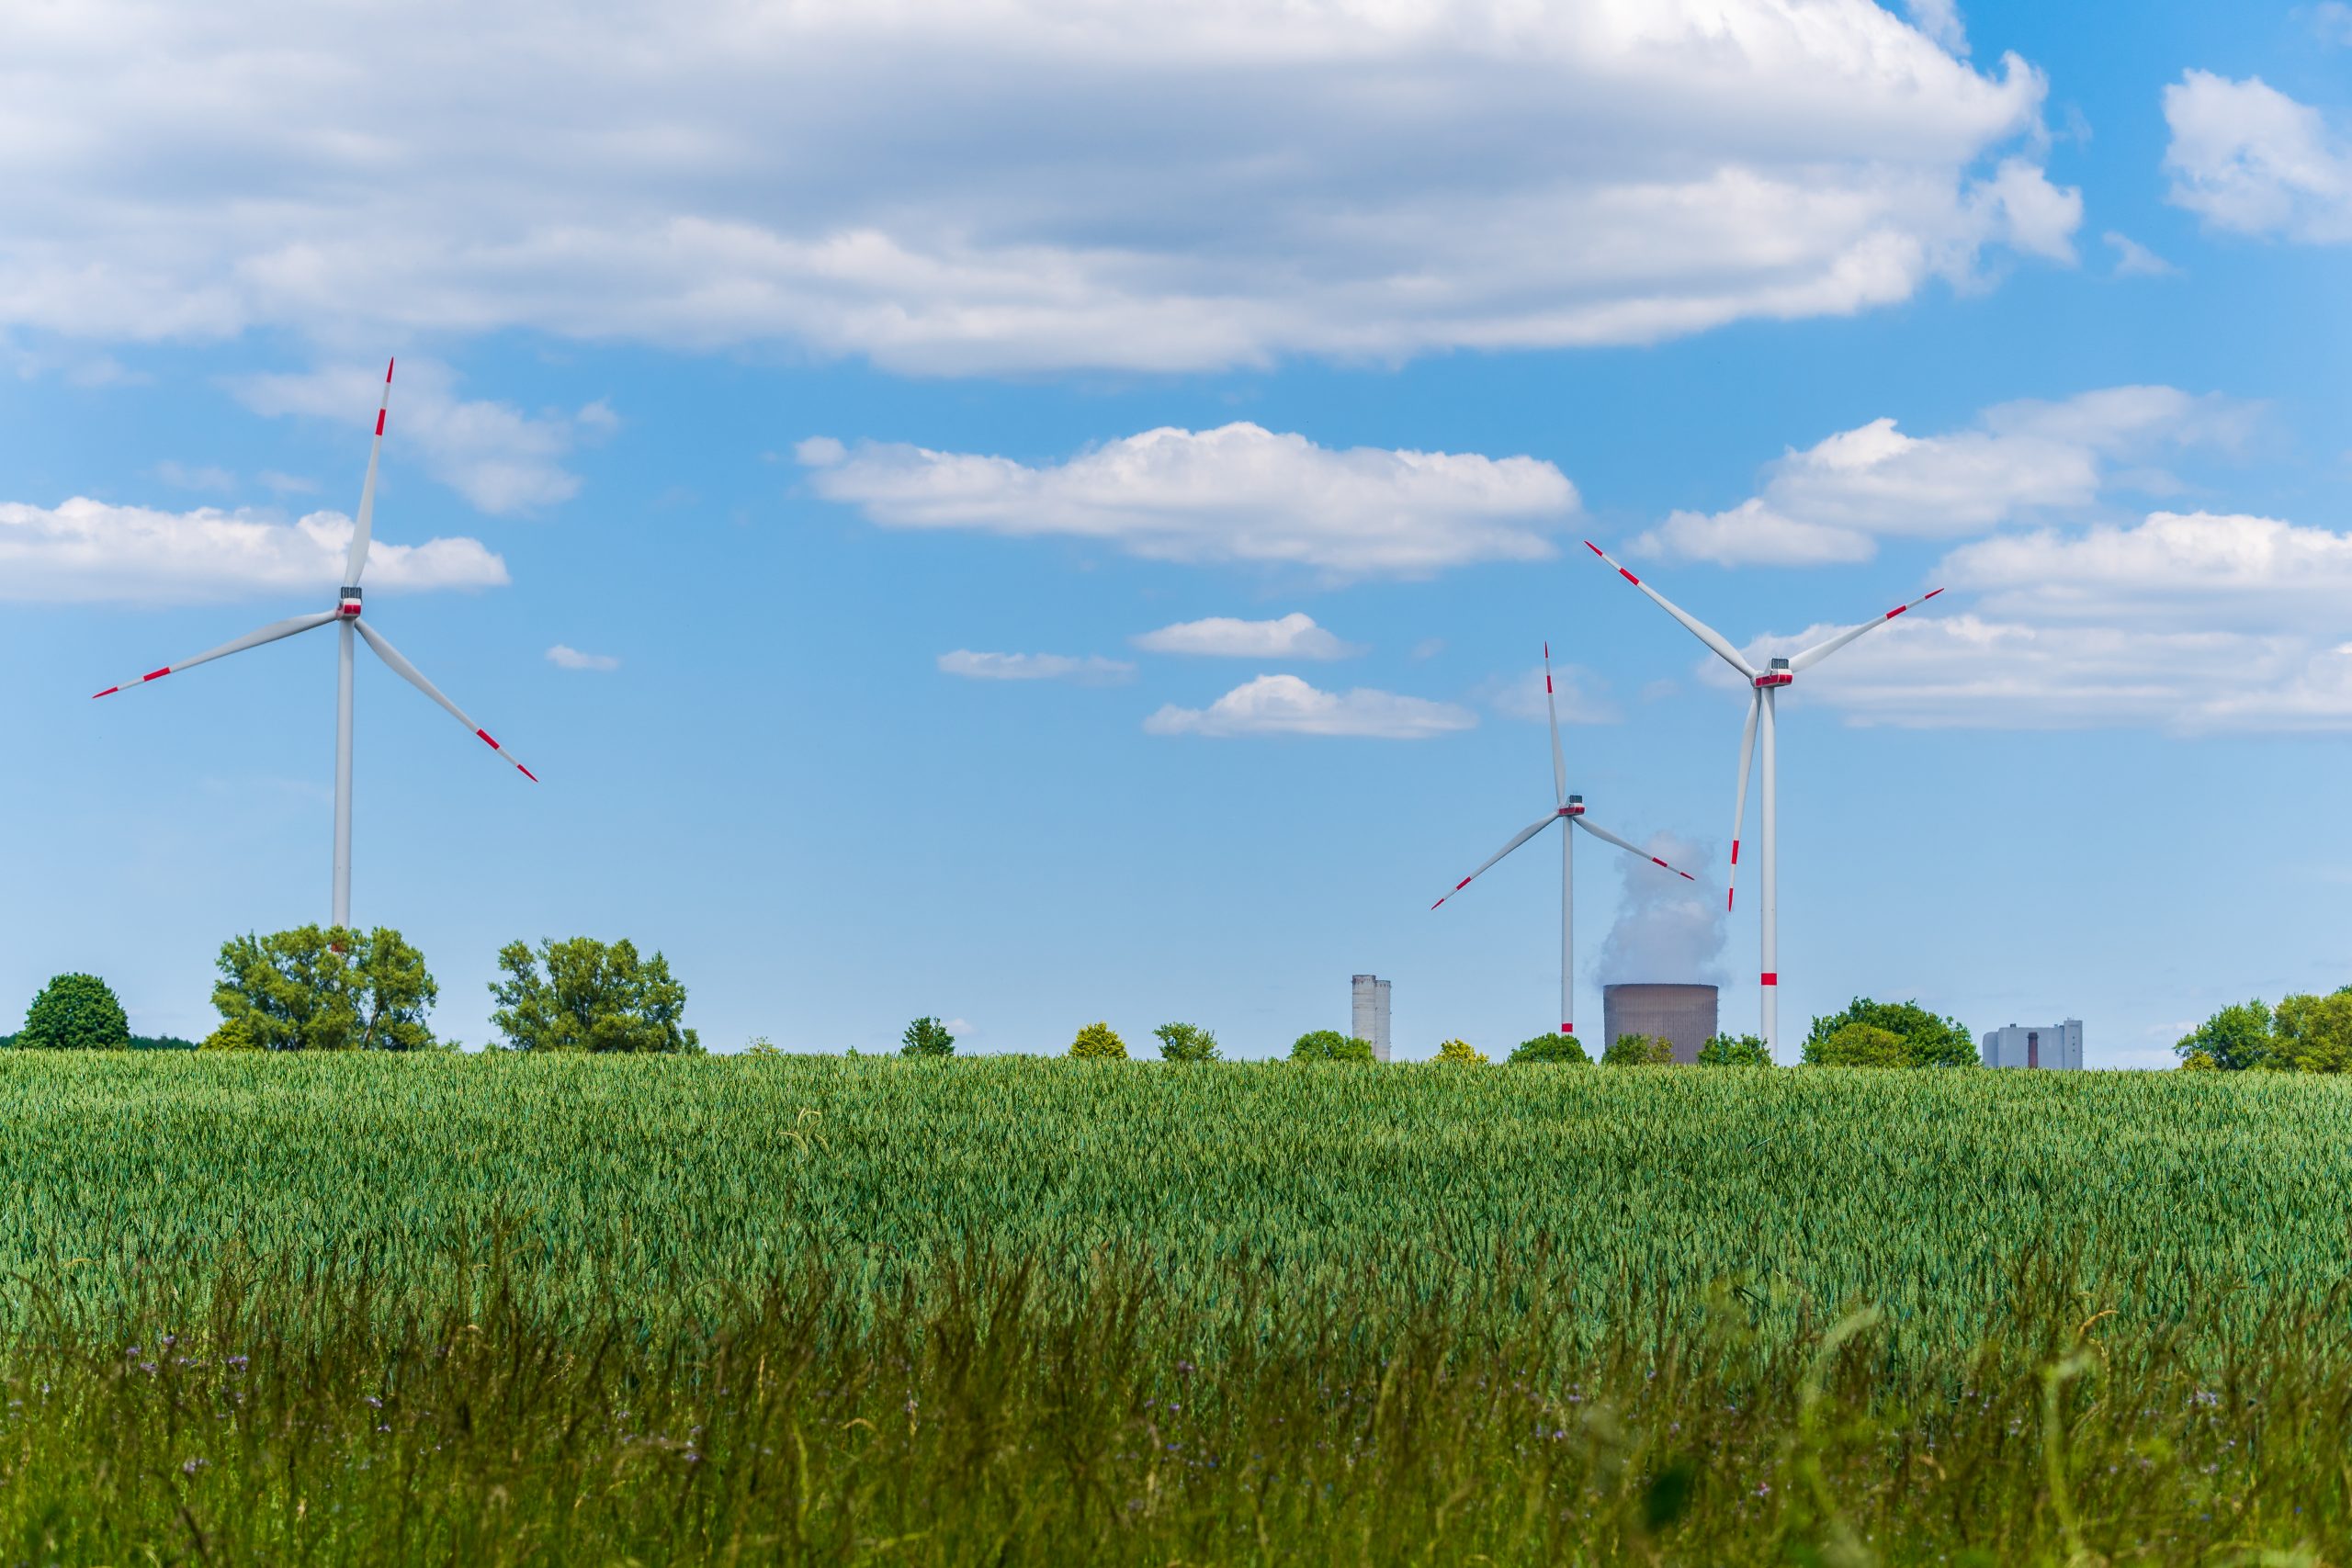 Wind,Turbines,And,Electric,Power,Plant,With,Smoking,Chimney,In